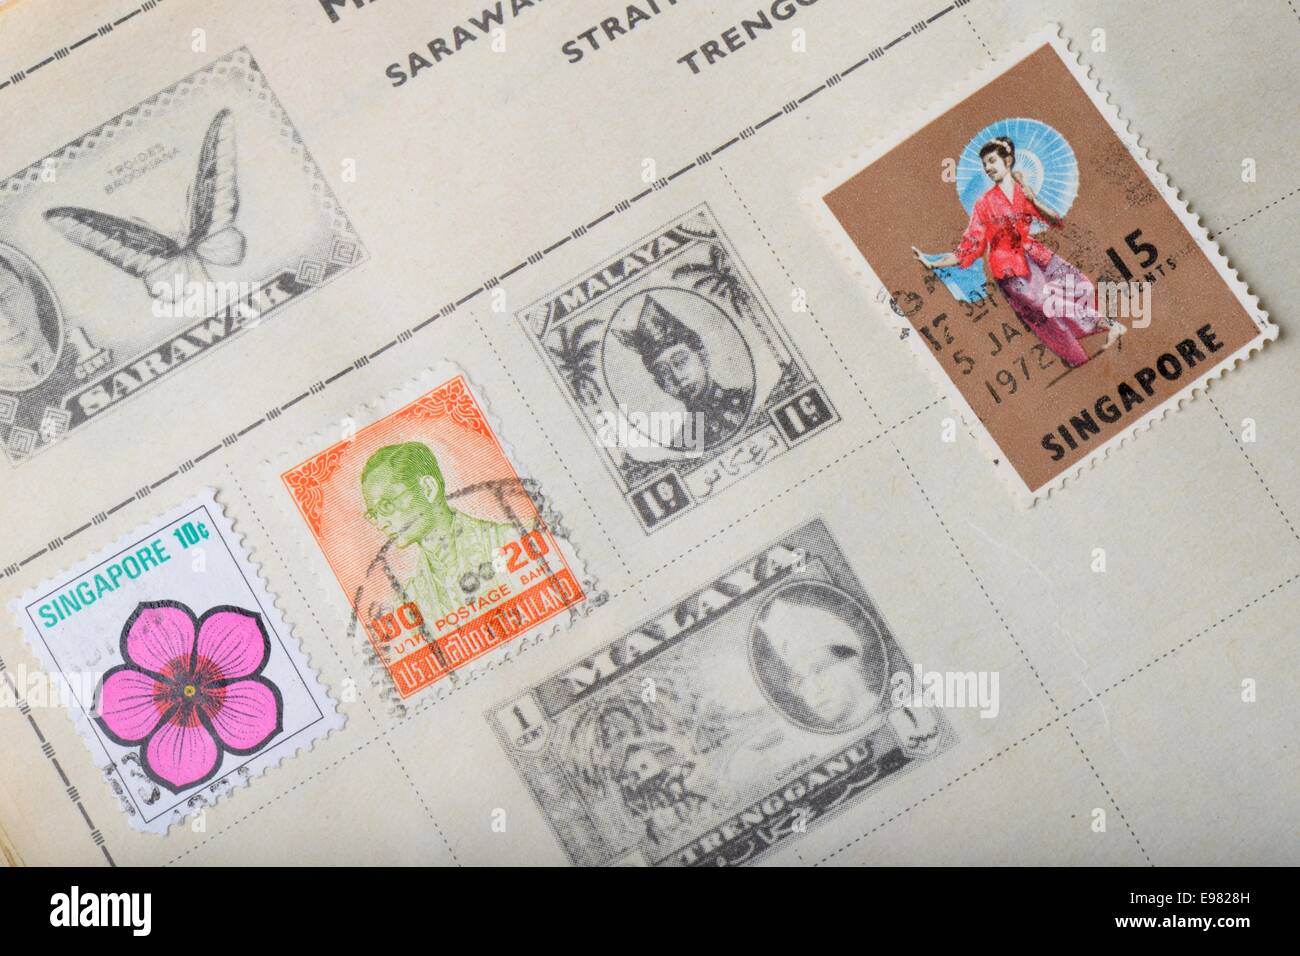 A page from a stamp collecting album. Stock Photo